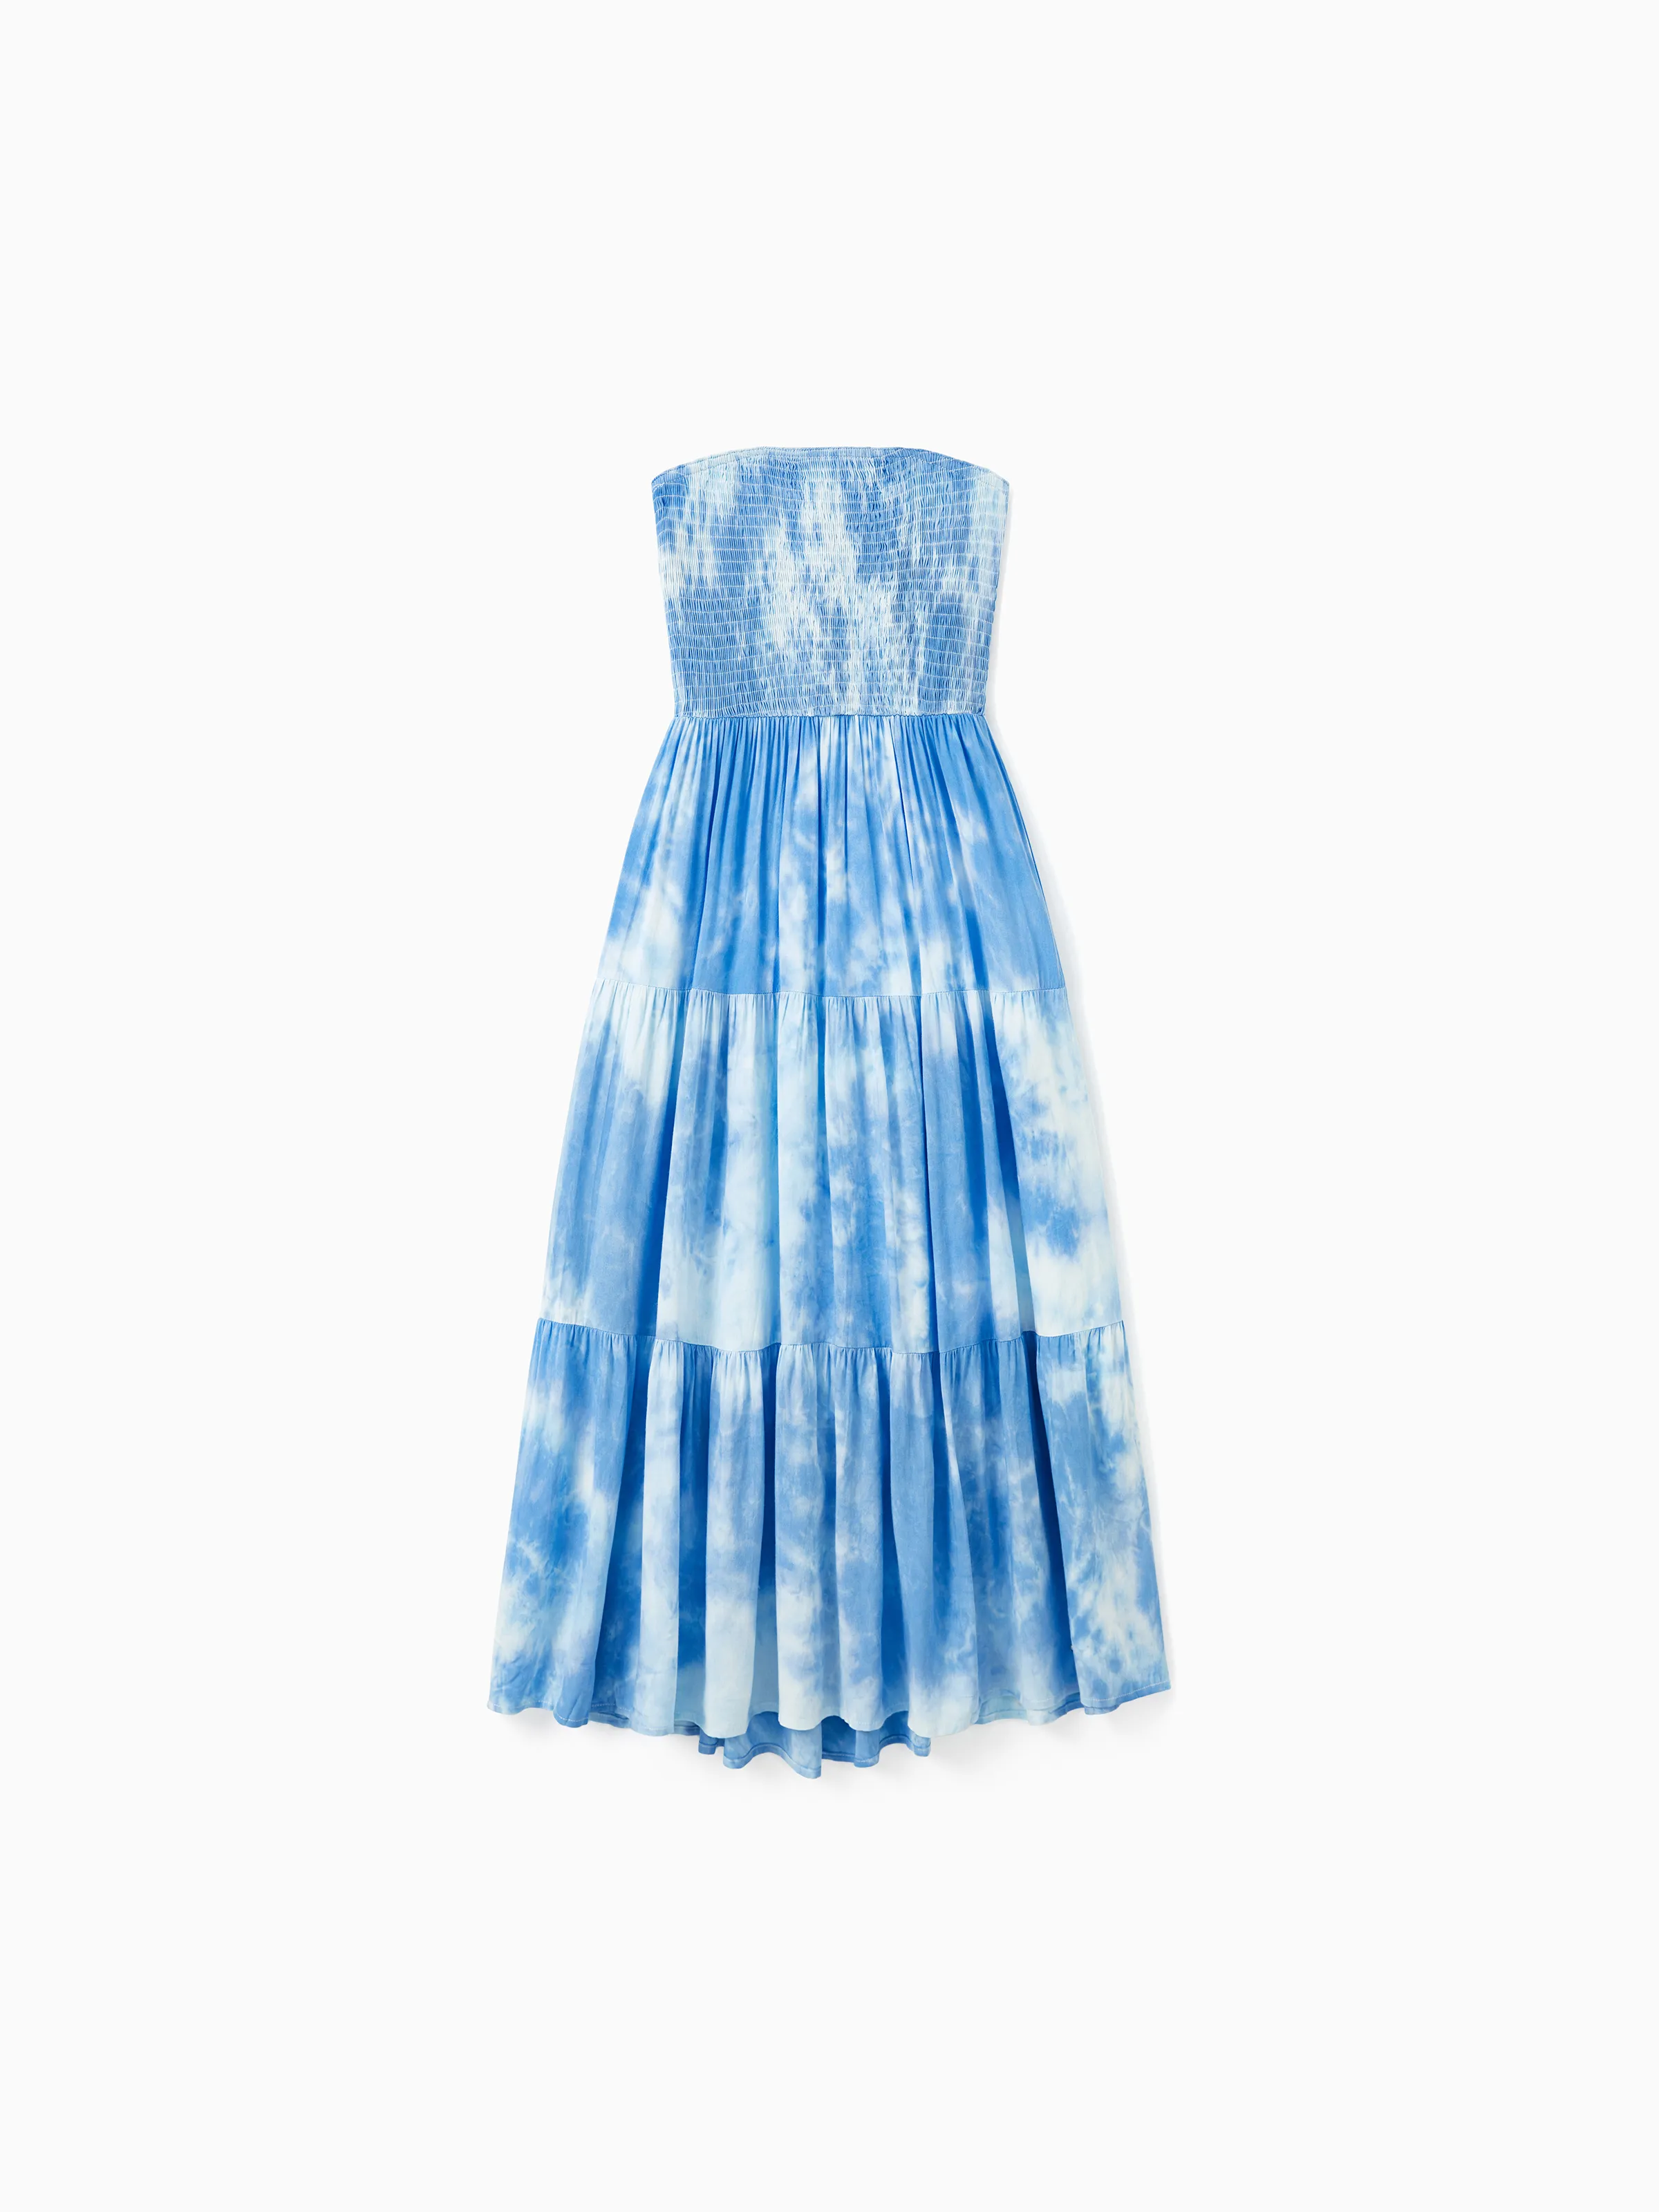 

Family Matching Sets Blue Tie-Dye Print Shirt or Strapless Shirred Top Flowy Tiered Ruffle Hem Dress